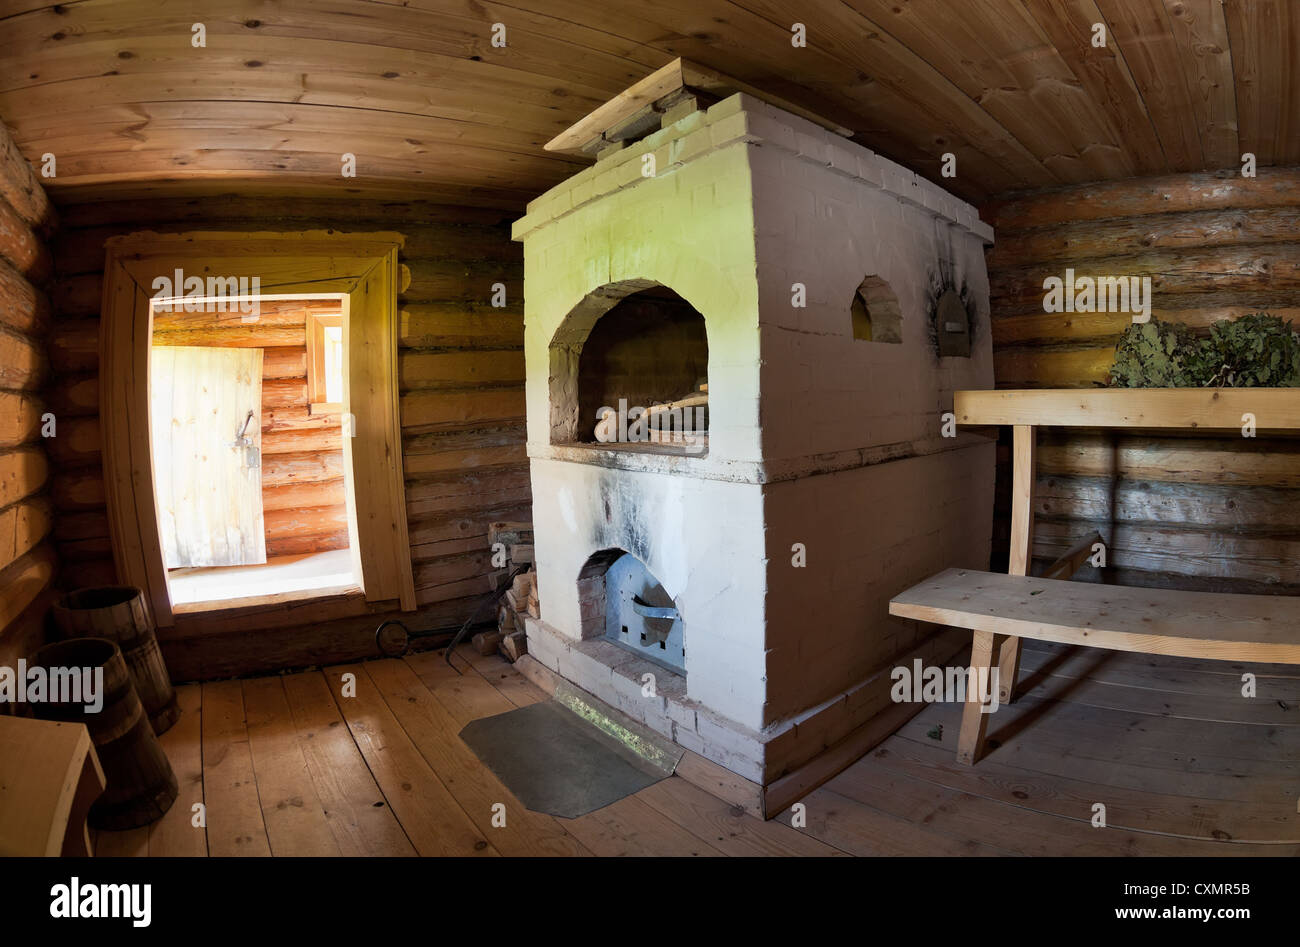 Interior of the Russian bath with stove Stock Photo